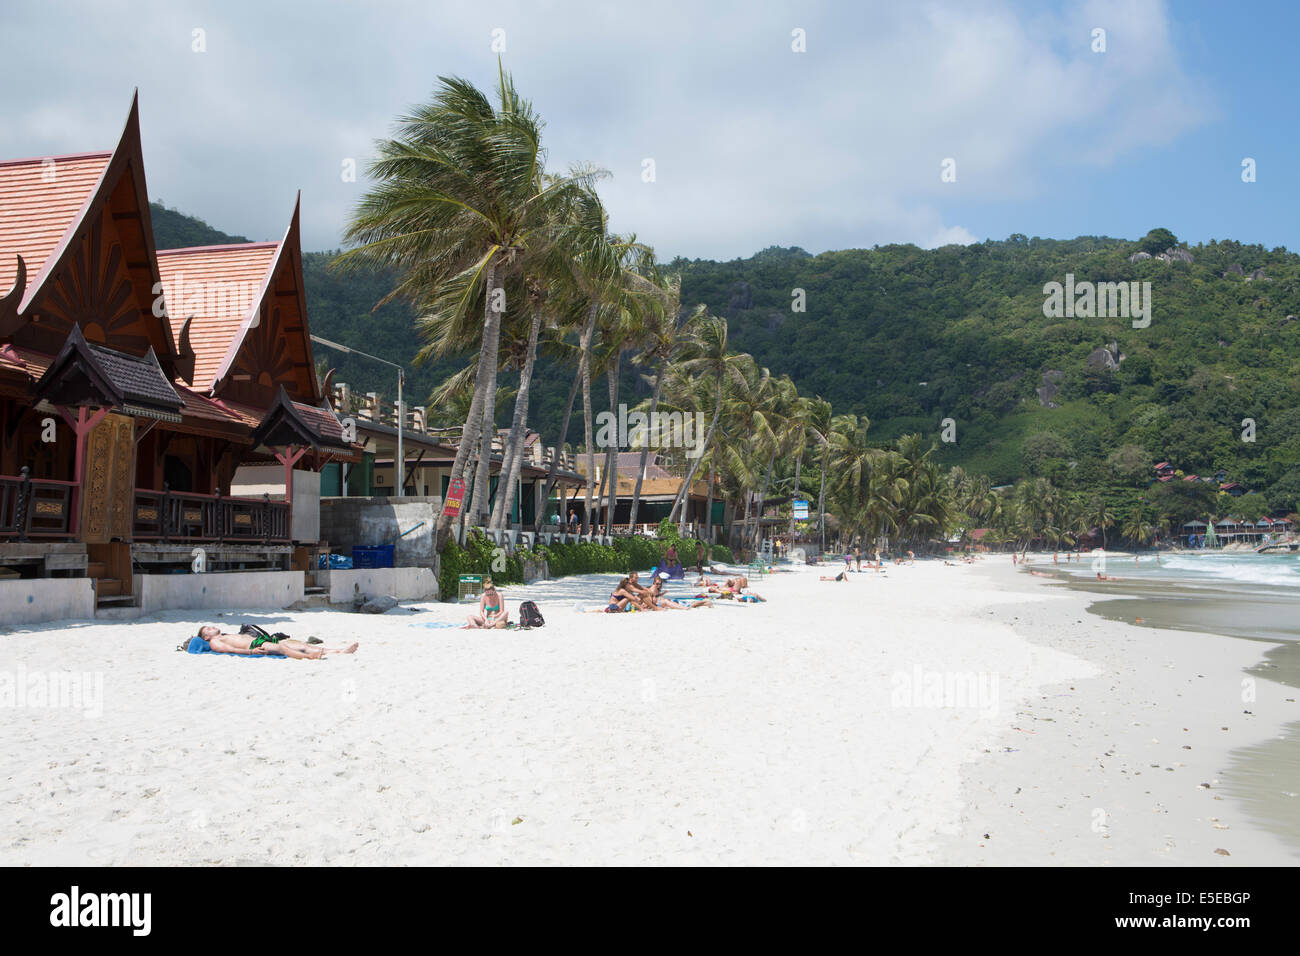 Haad Rin (Hat Rin or Sunrise) beach - the location of the Full Moon Party, Koh Pha Ngang, Thailand Stock Photo